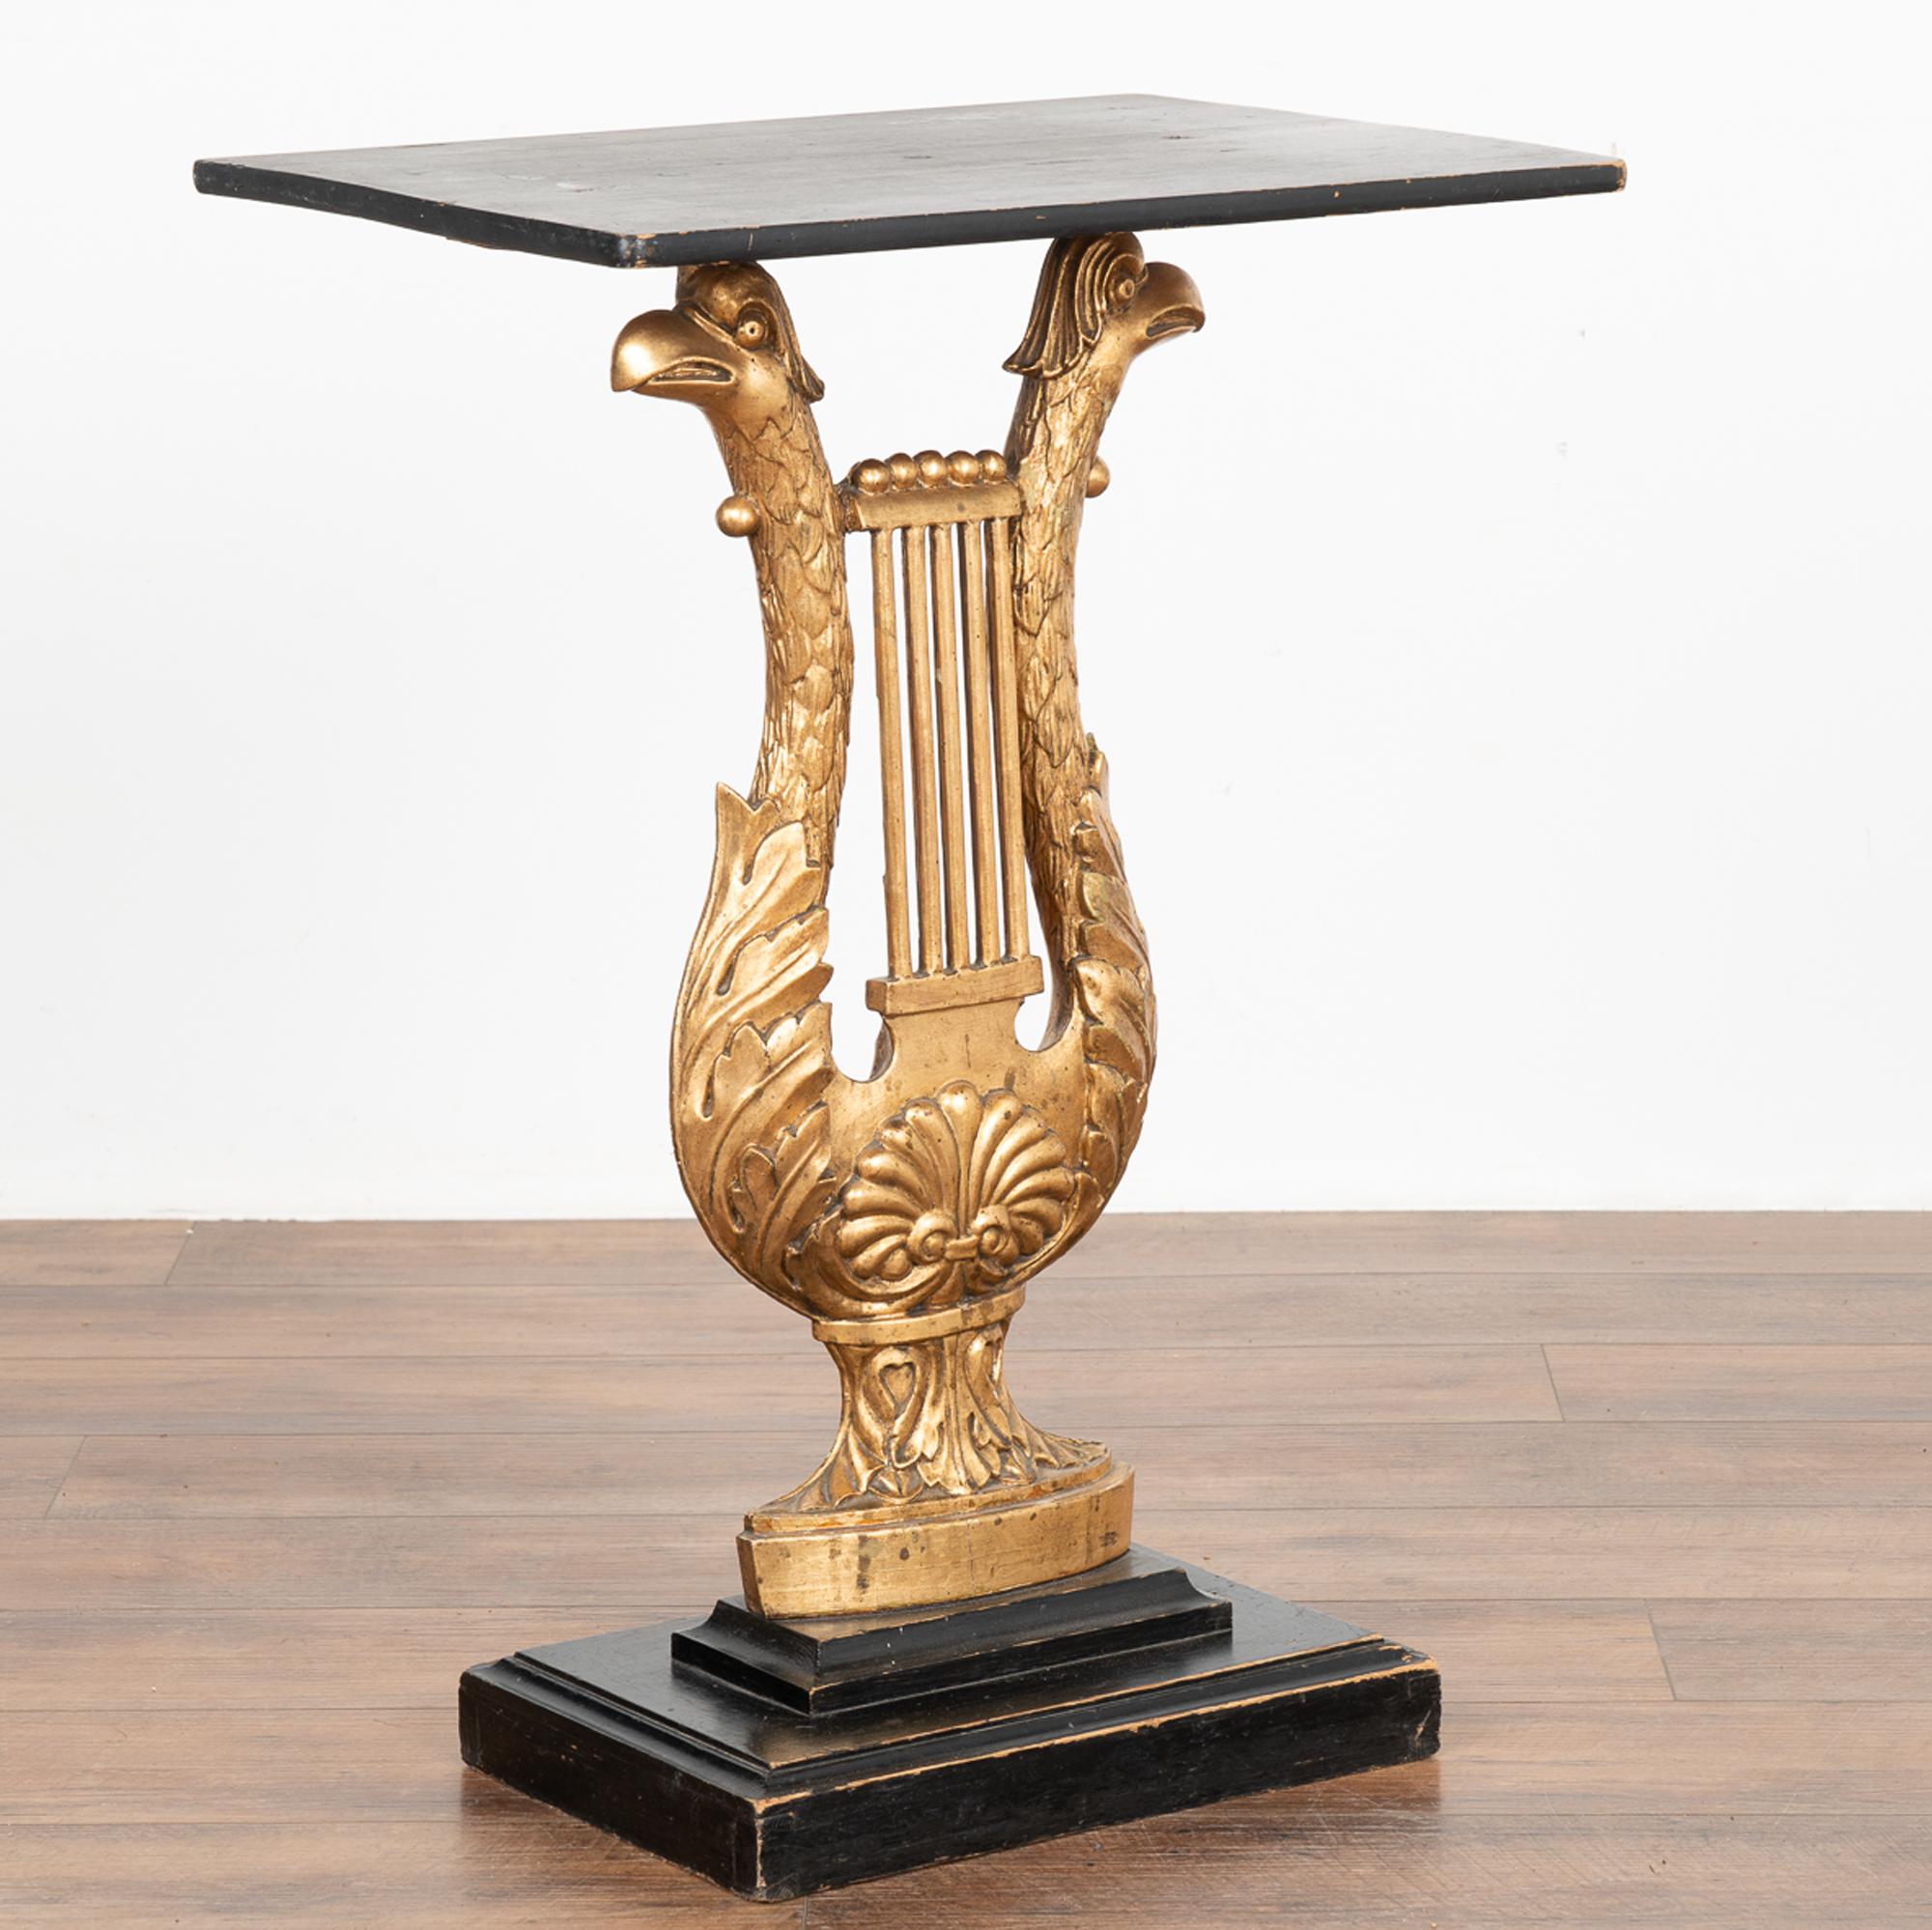 Dramatic eagle head carving in shape of harp form the base of this Neoclassical console table from Sweden.
The gold painted central carved column is complimented by the black painted top and lower base.
Restored, strong/stable. Any scratches,